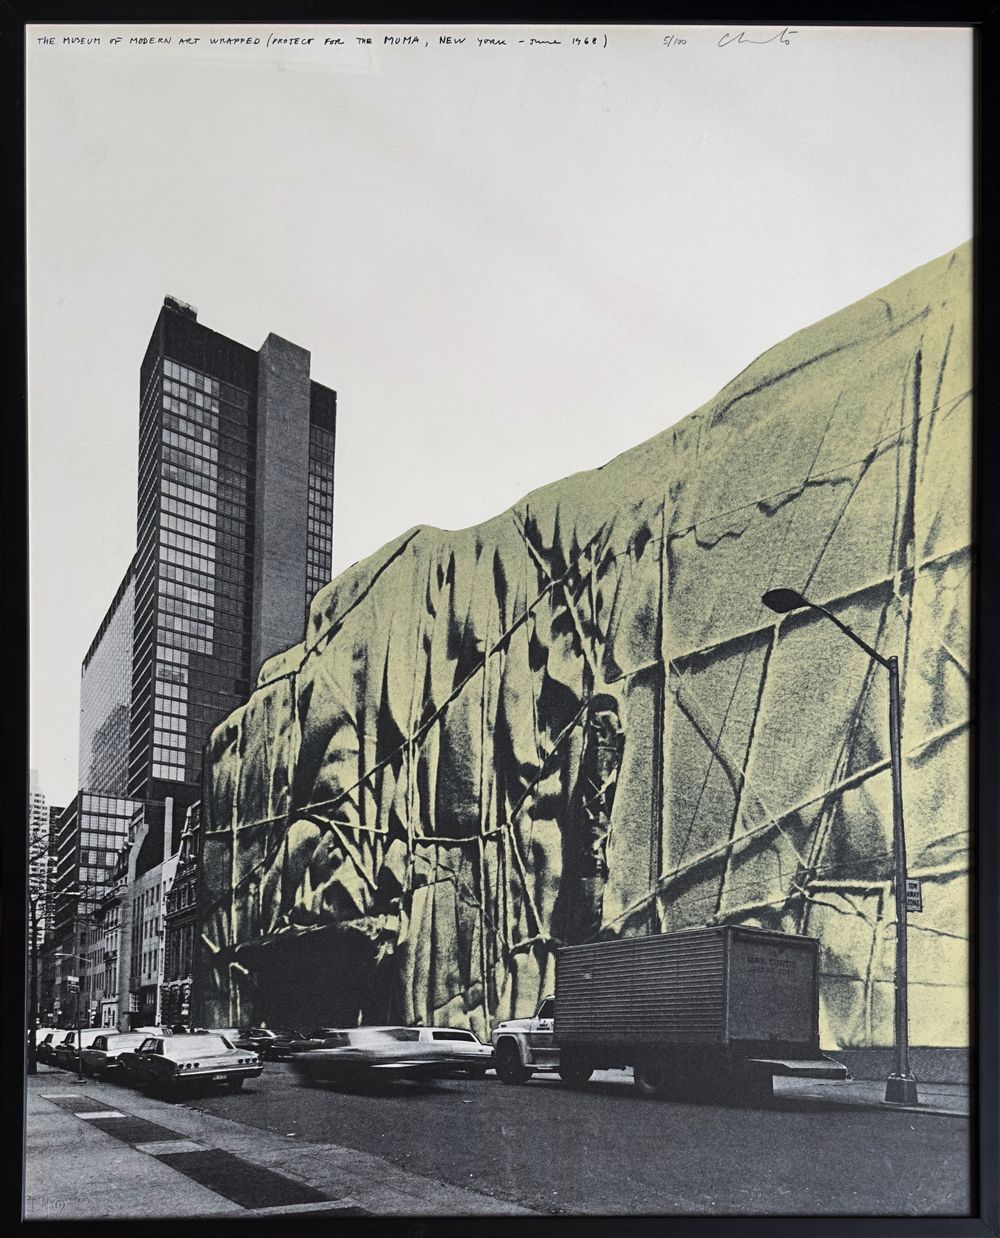 Not realized projects - The Museum of Modern Art wrapped New York